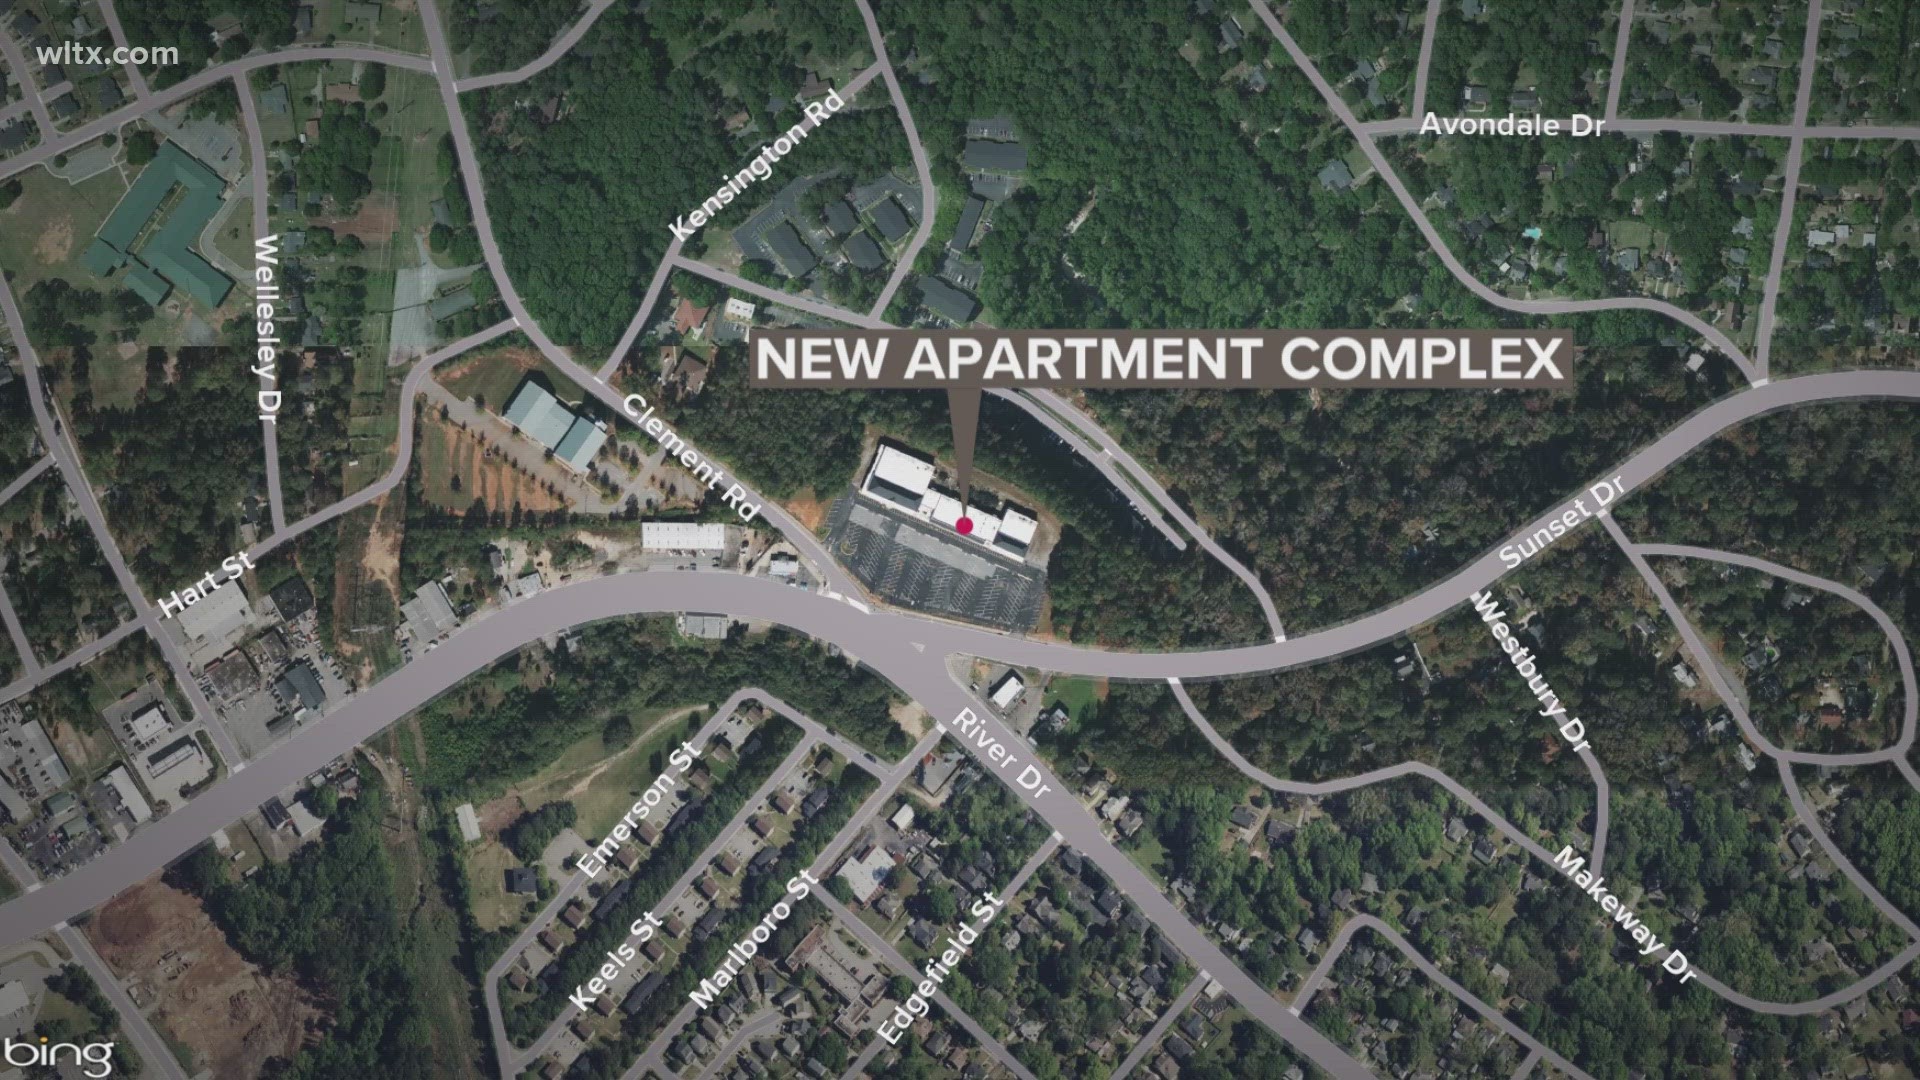 Richland County gave final reading approval to a $94M development plan that will bring a 300 unit apartment complex to the Earlewood neighborhood.